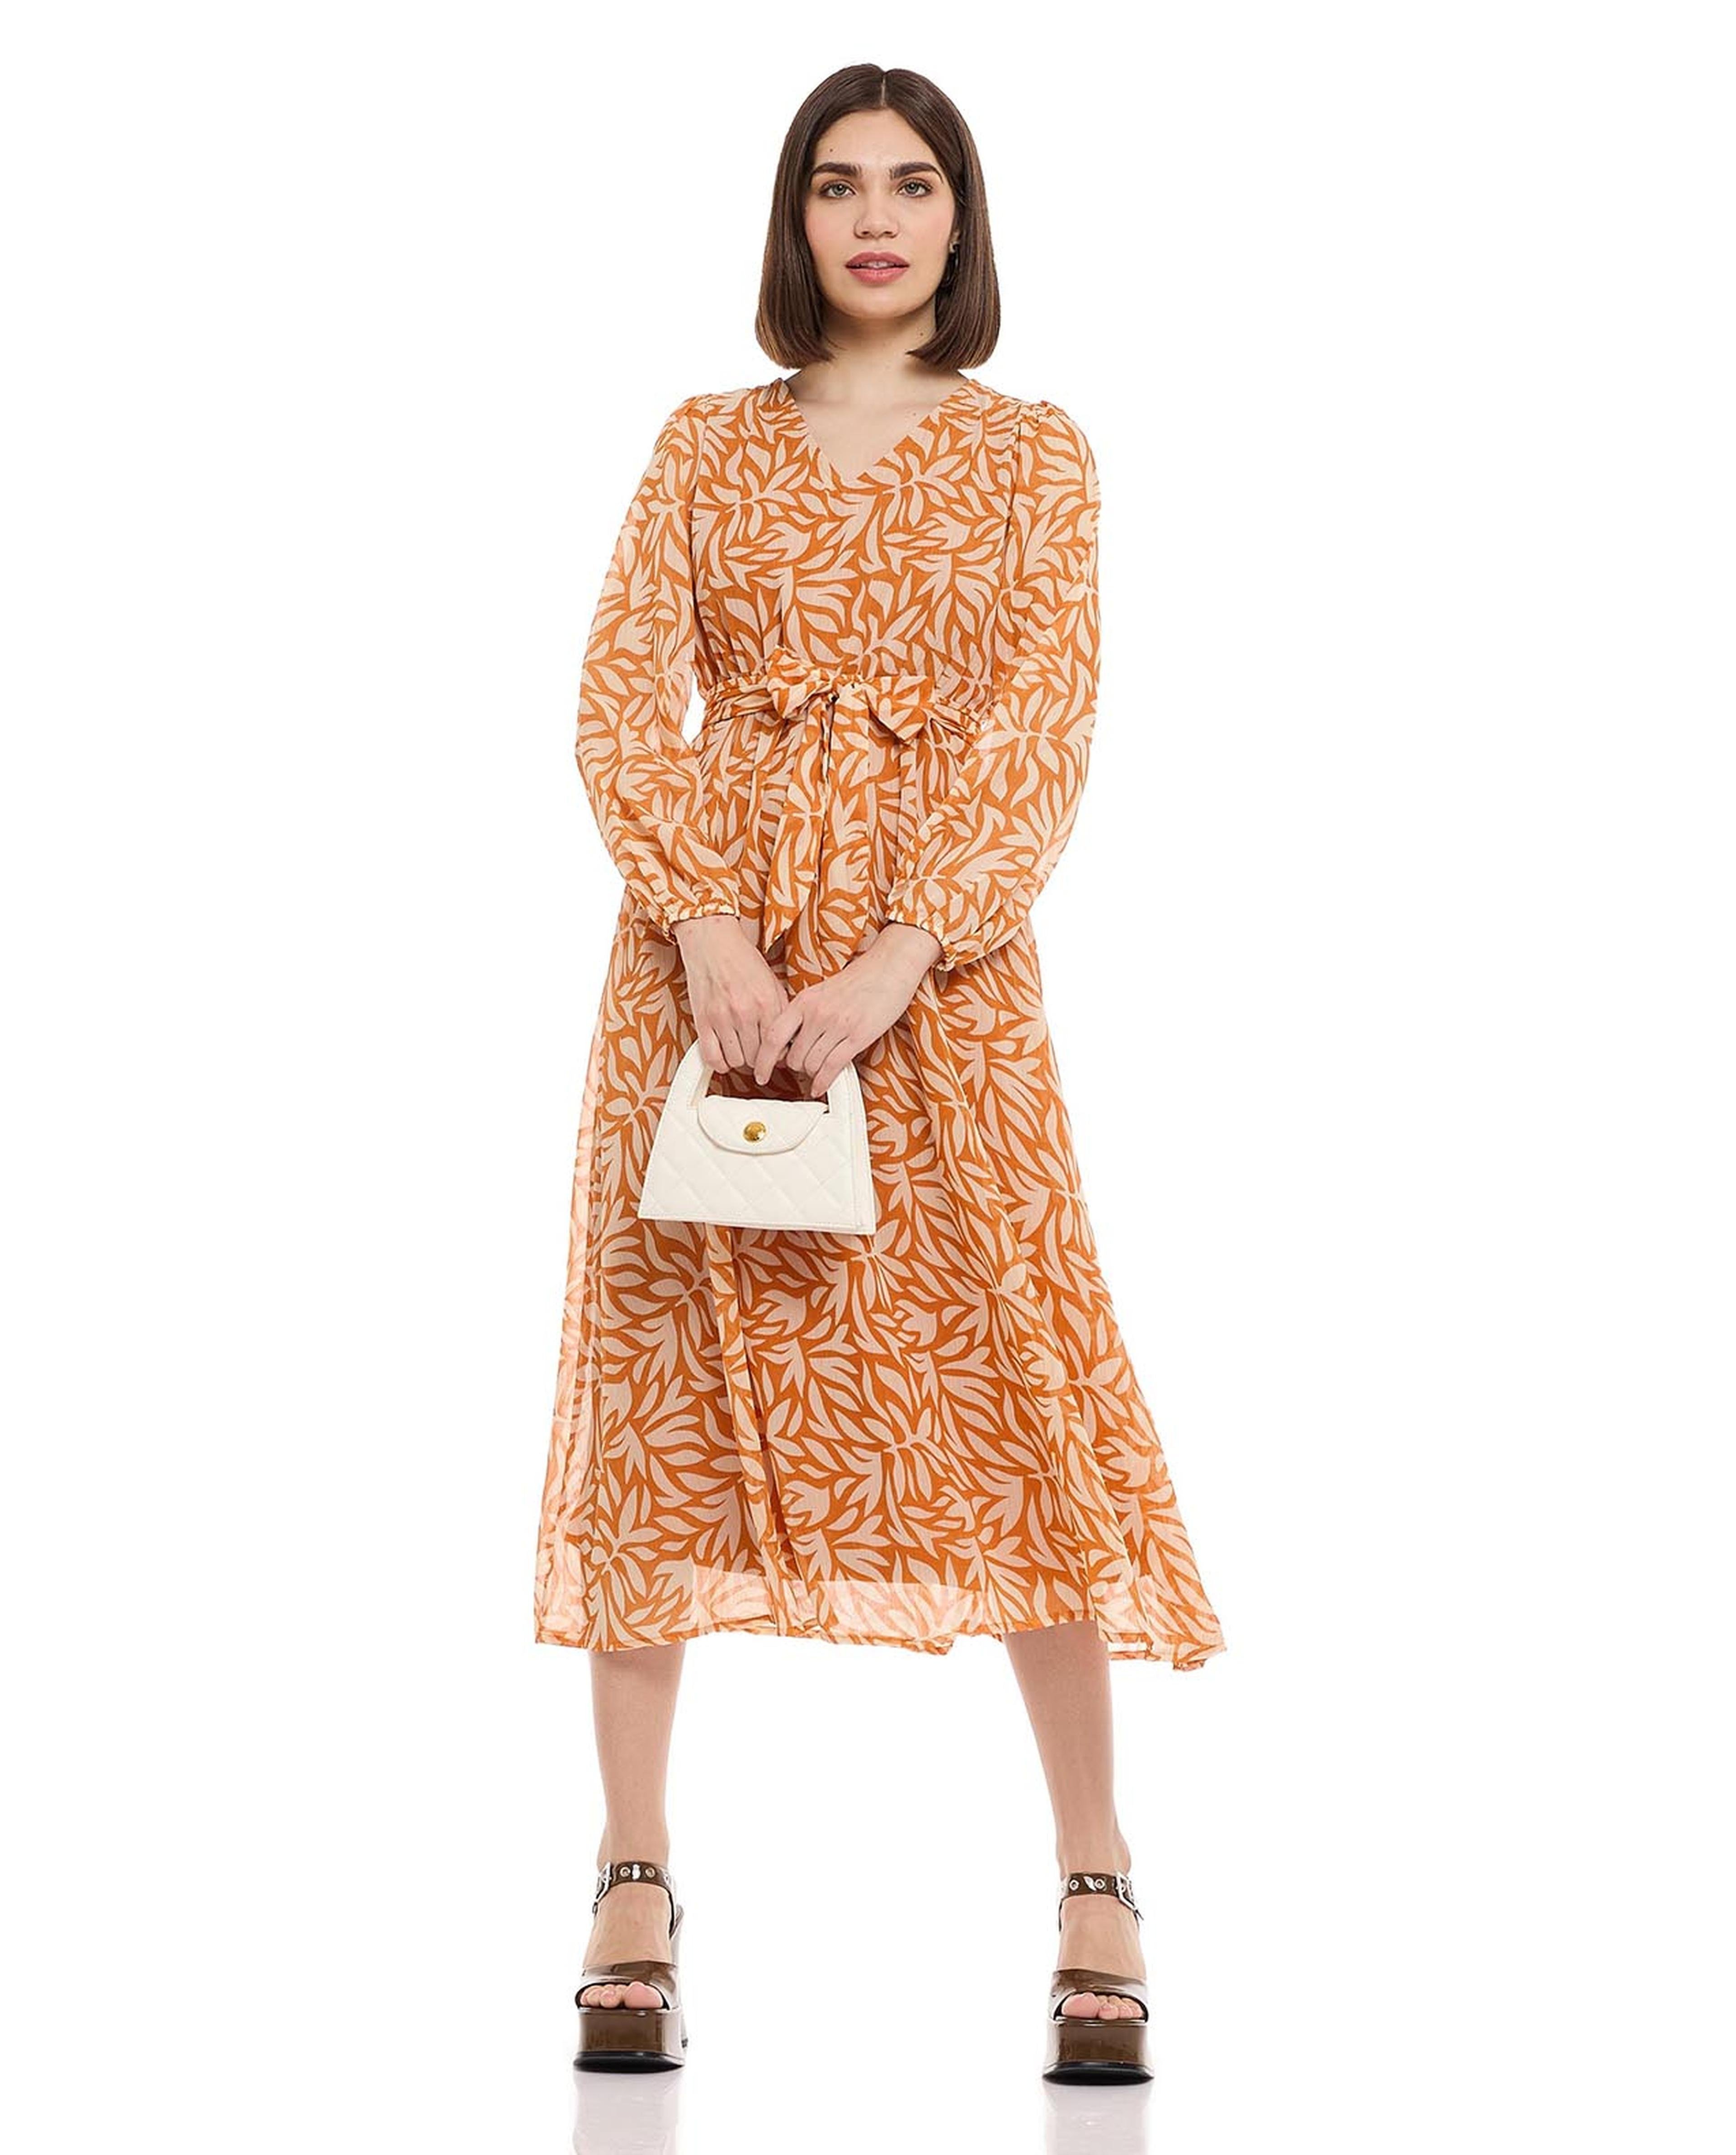 Patterned Midi Dress with V-Neck and Long Sleeves